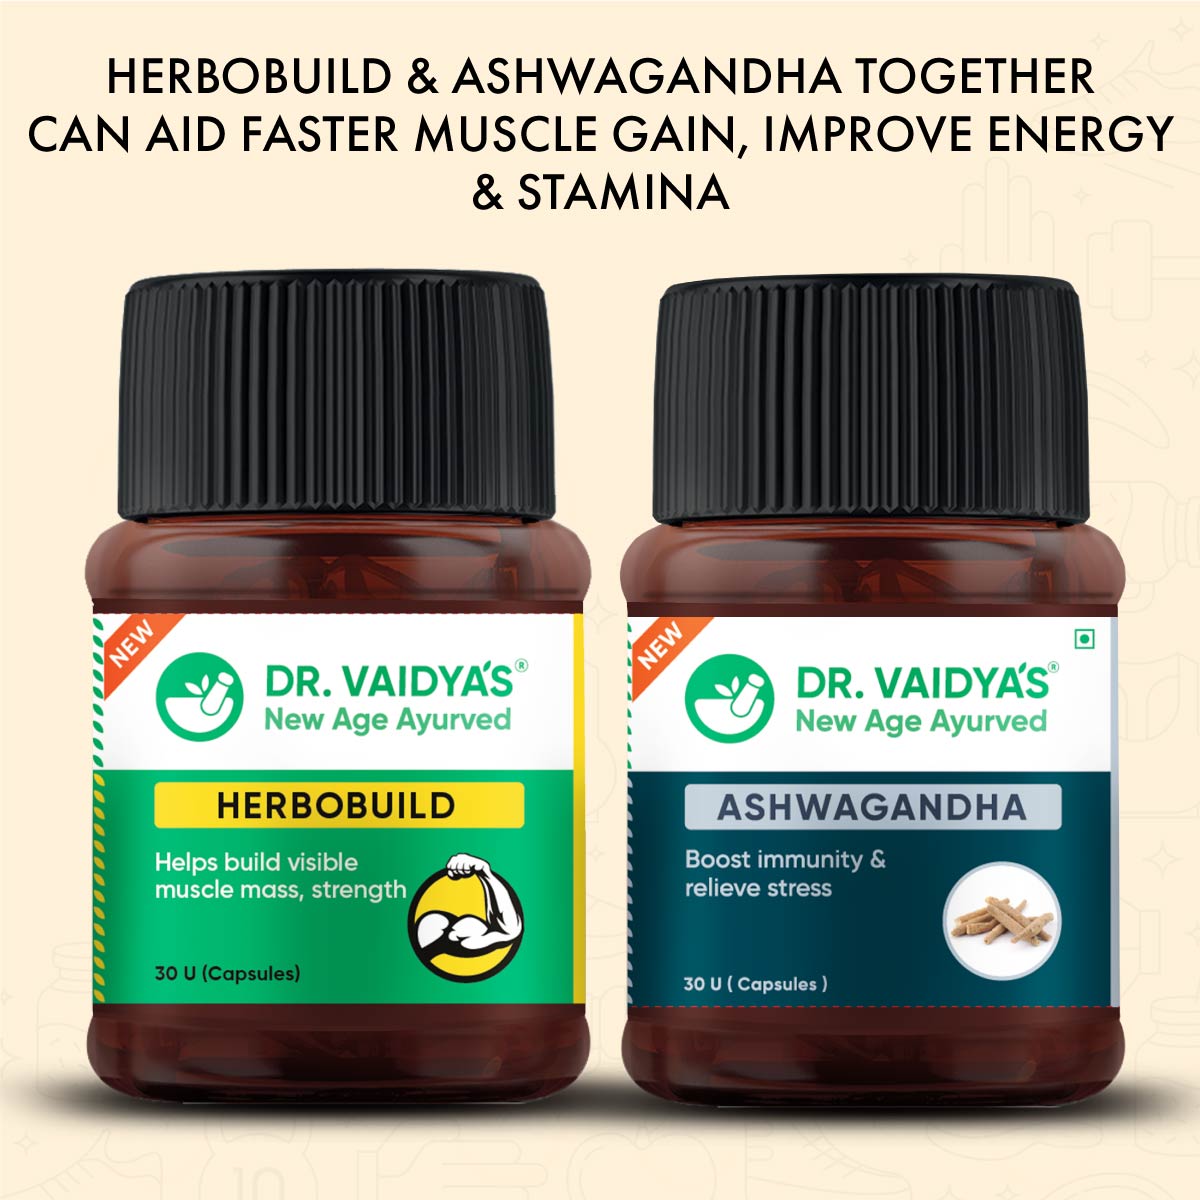 Herbobuild & Ashwagandha Combo: For Fast Muscle Growth, Stamina & Fitness